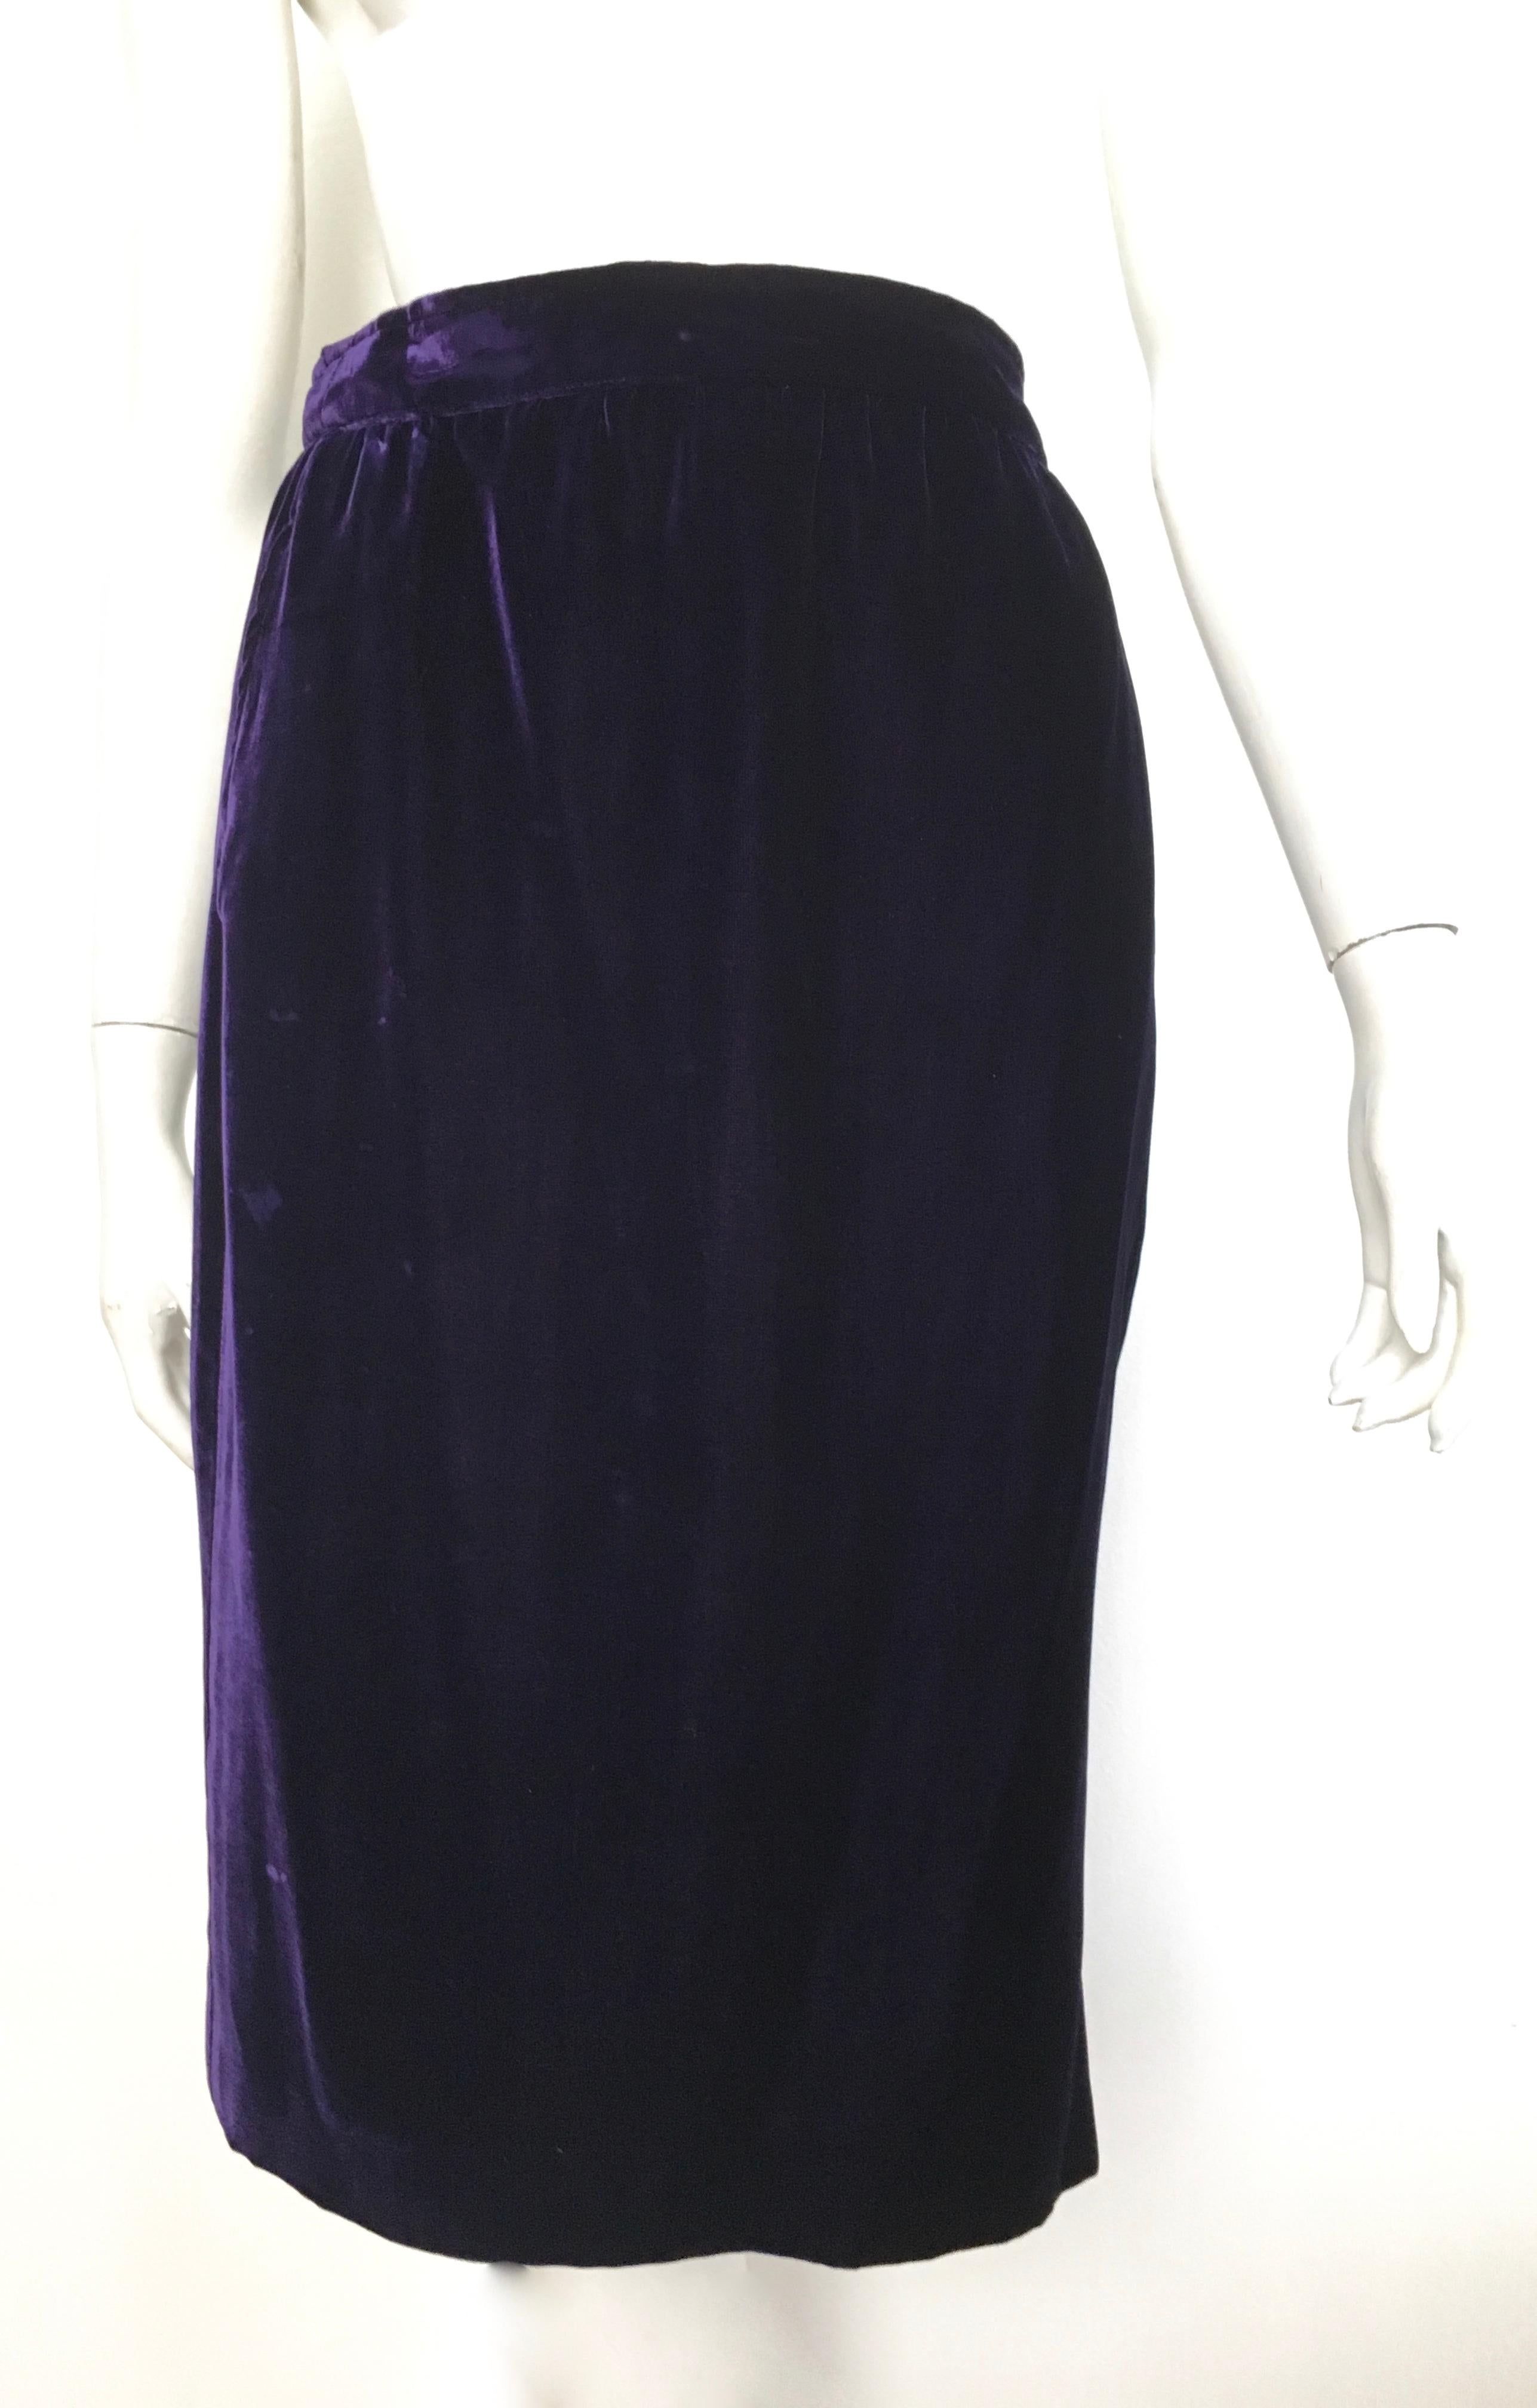 Emanuel Ungaro Parallele Paris 1980s royal purple velvet long skirt with pockets is labeled a size 12 but fits like a modern size 4.  The waist on this skirt is 28